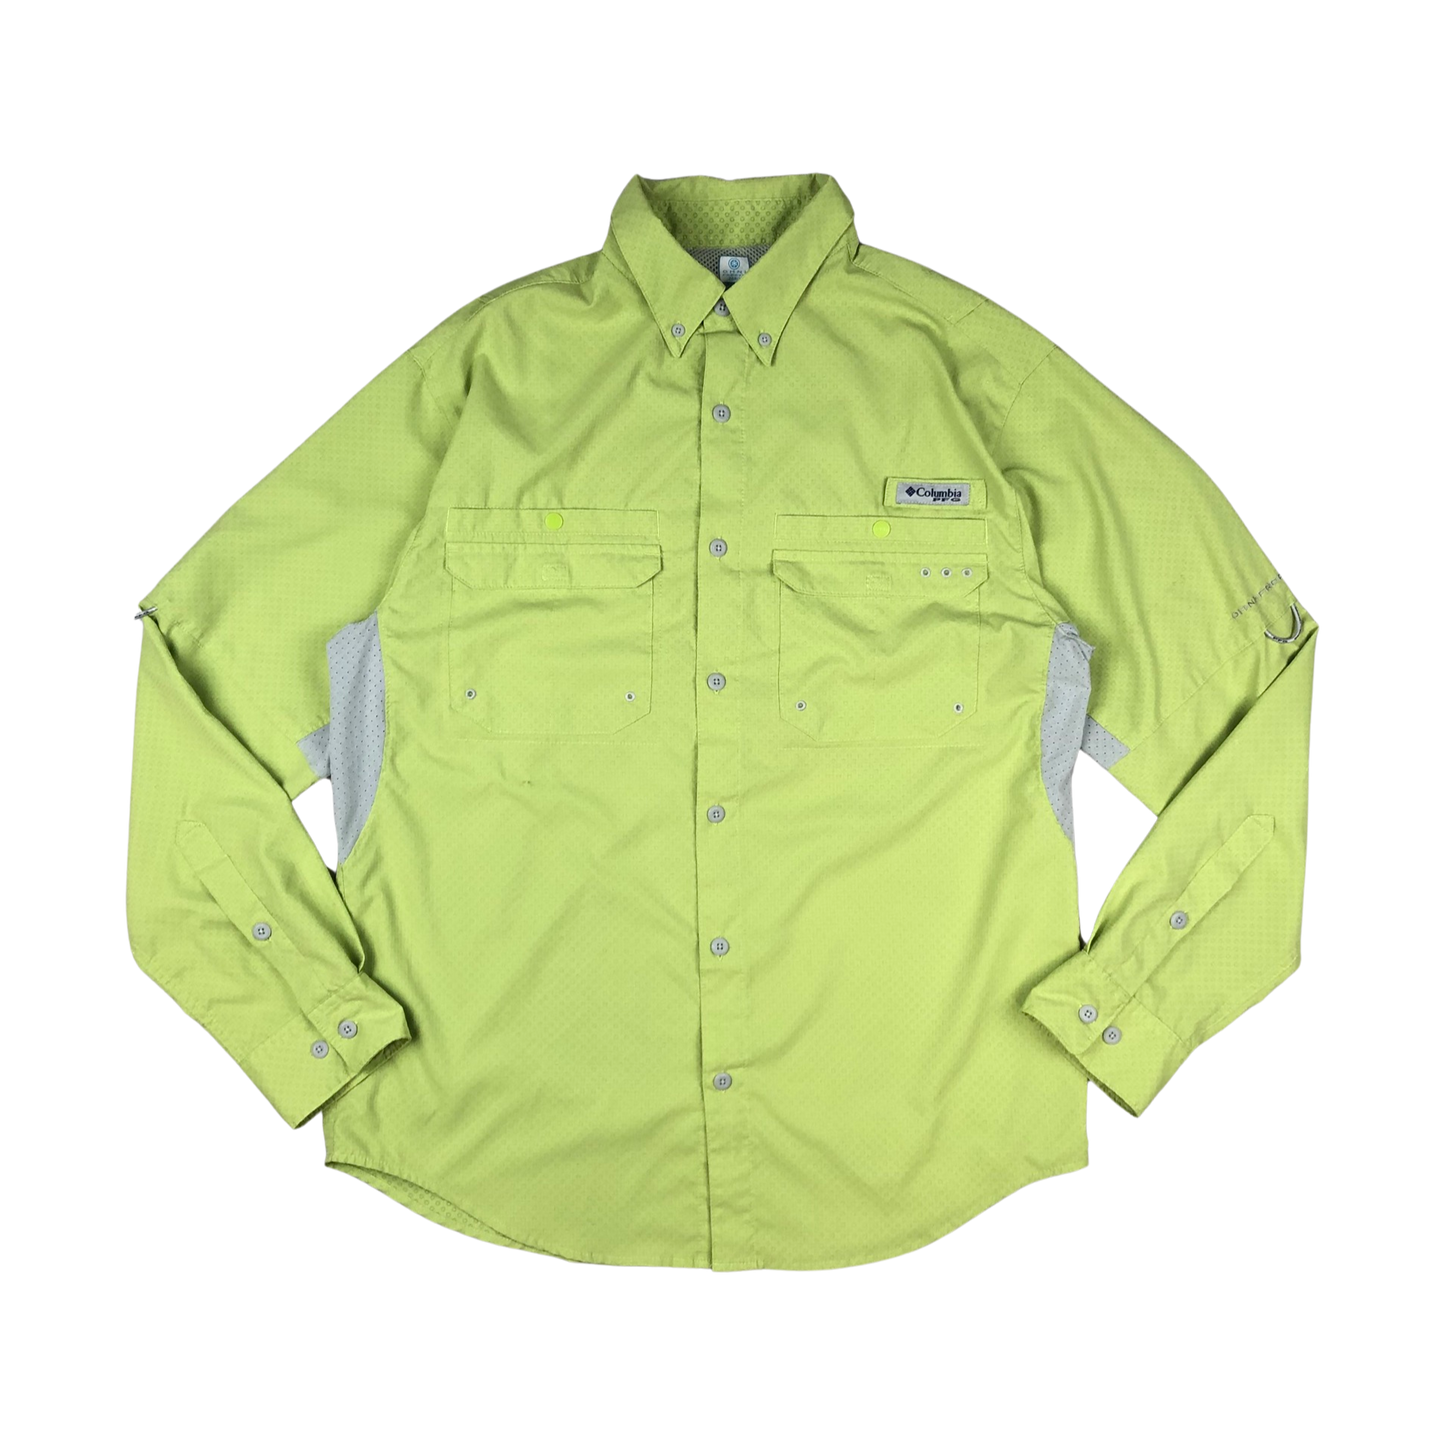 Preloved Columbia Technical Lime Green Shirt